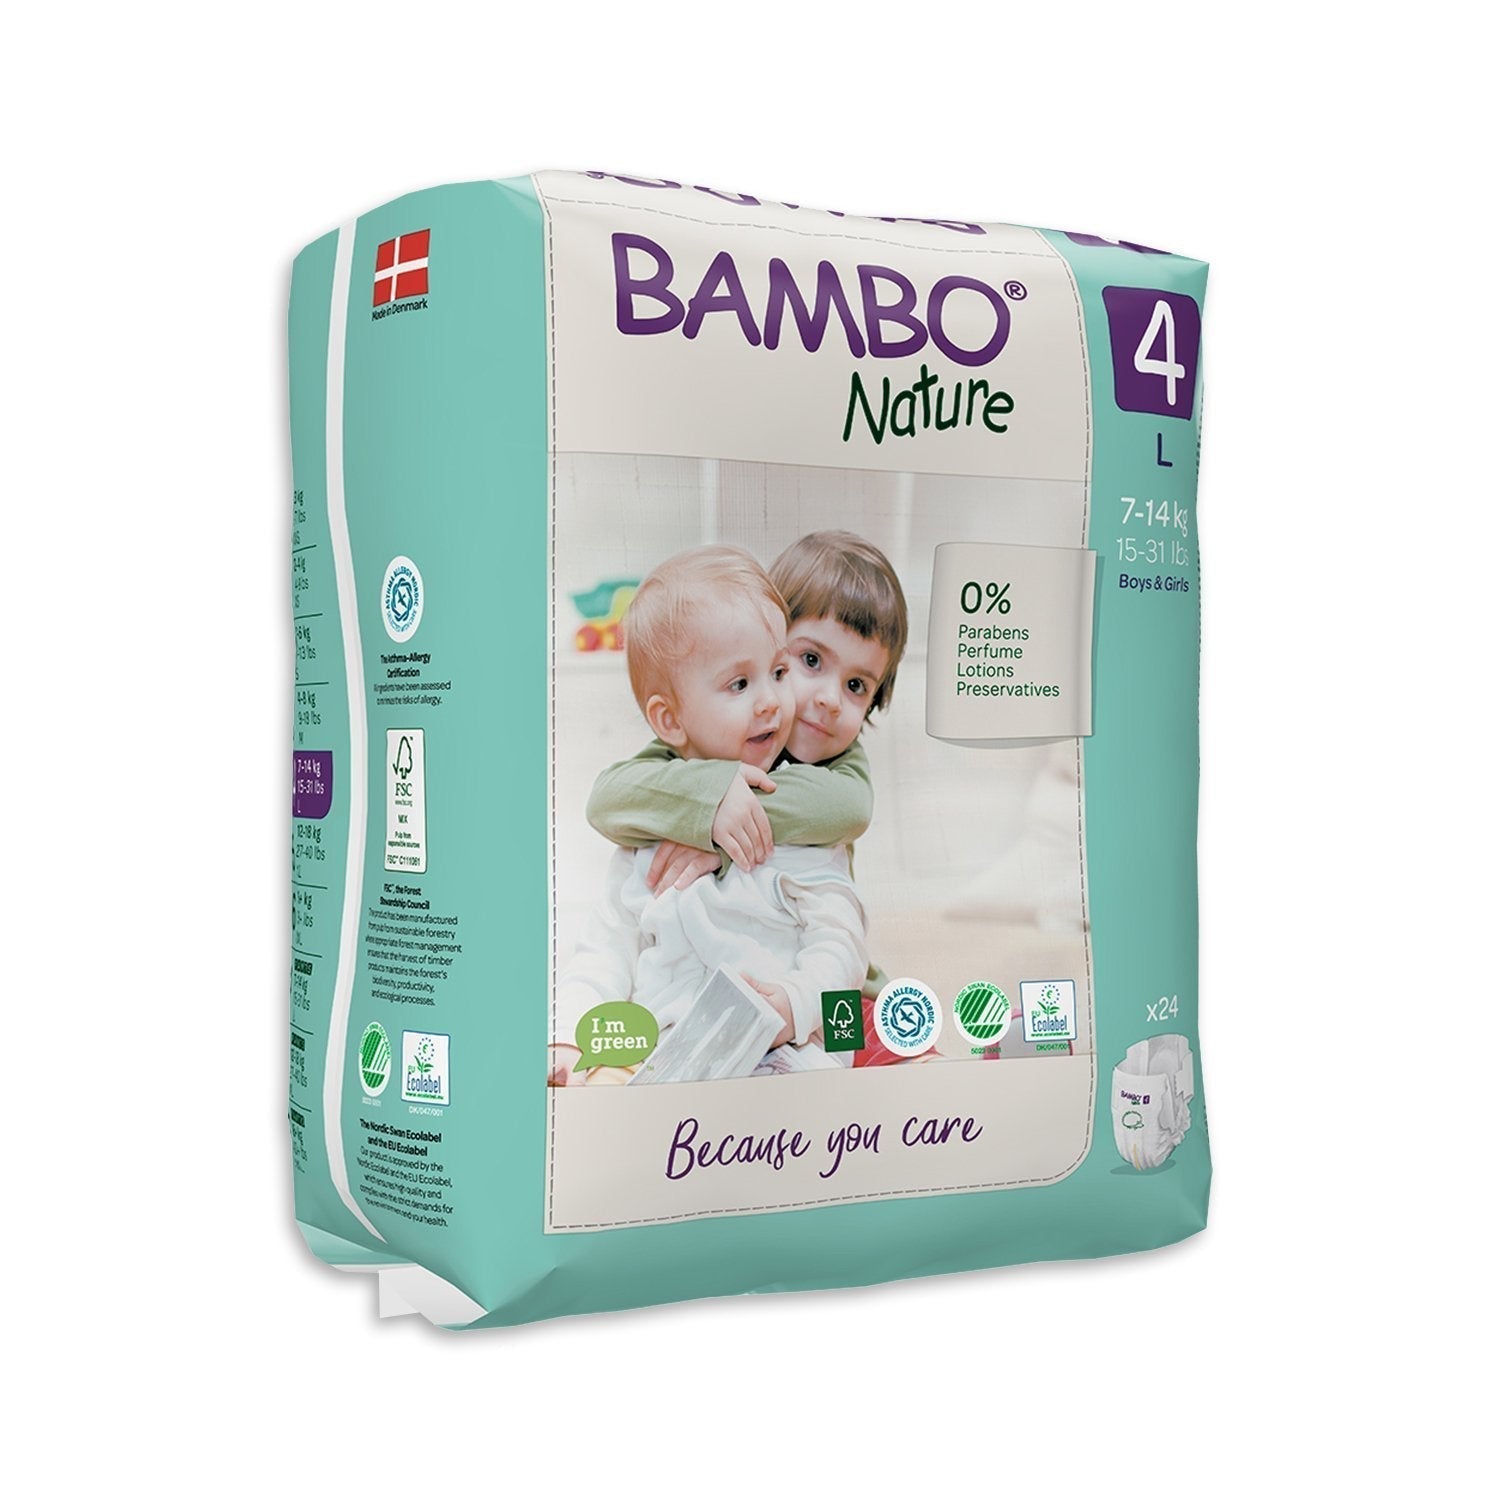 Bambo Nature Bambo Nature Nappies Size 4 (7-14kg) - CT/144 Pads, Diapers And Protectors 4 (7-14kg) Carton of 144